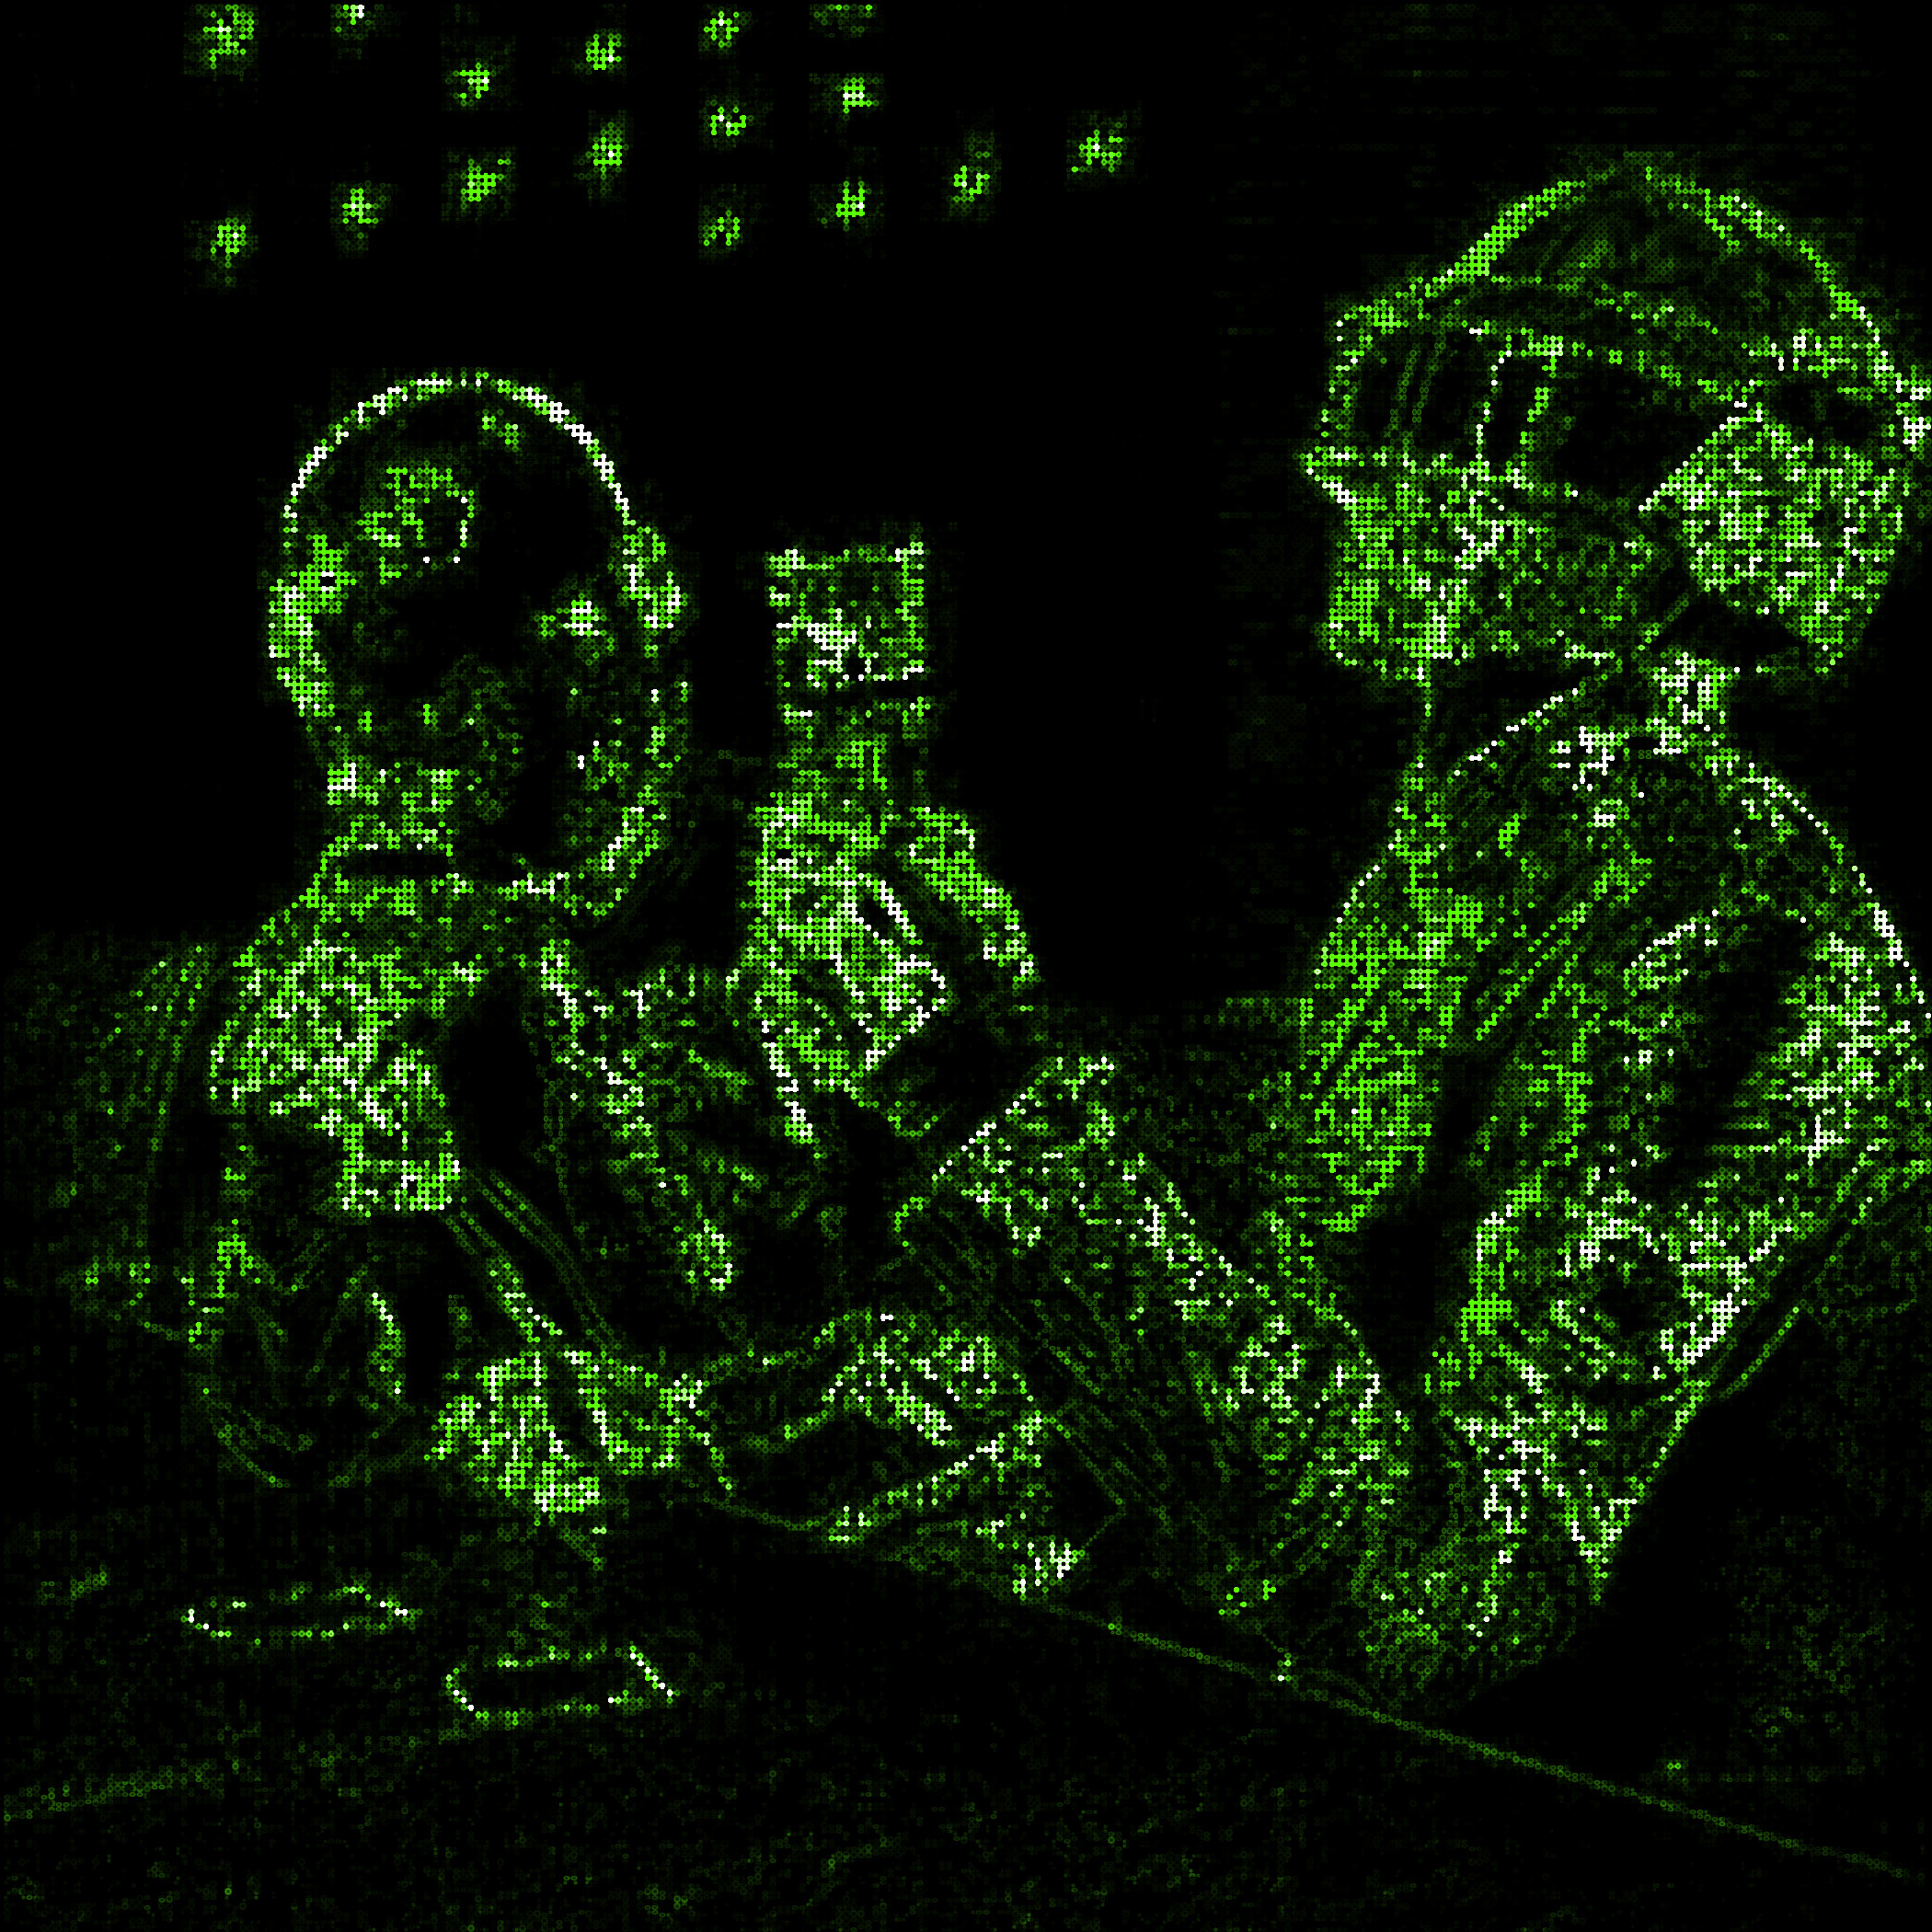 daft punk lcd effect. I created this. based off of this photo: http://lenore619-void.deviantart.com/art/Daft-Punk-Happy-New-Years-191793004